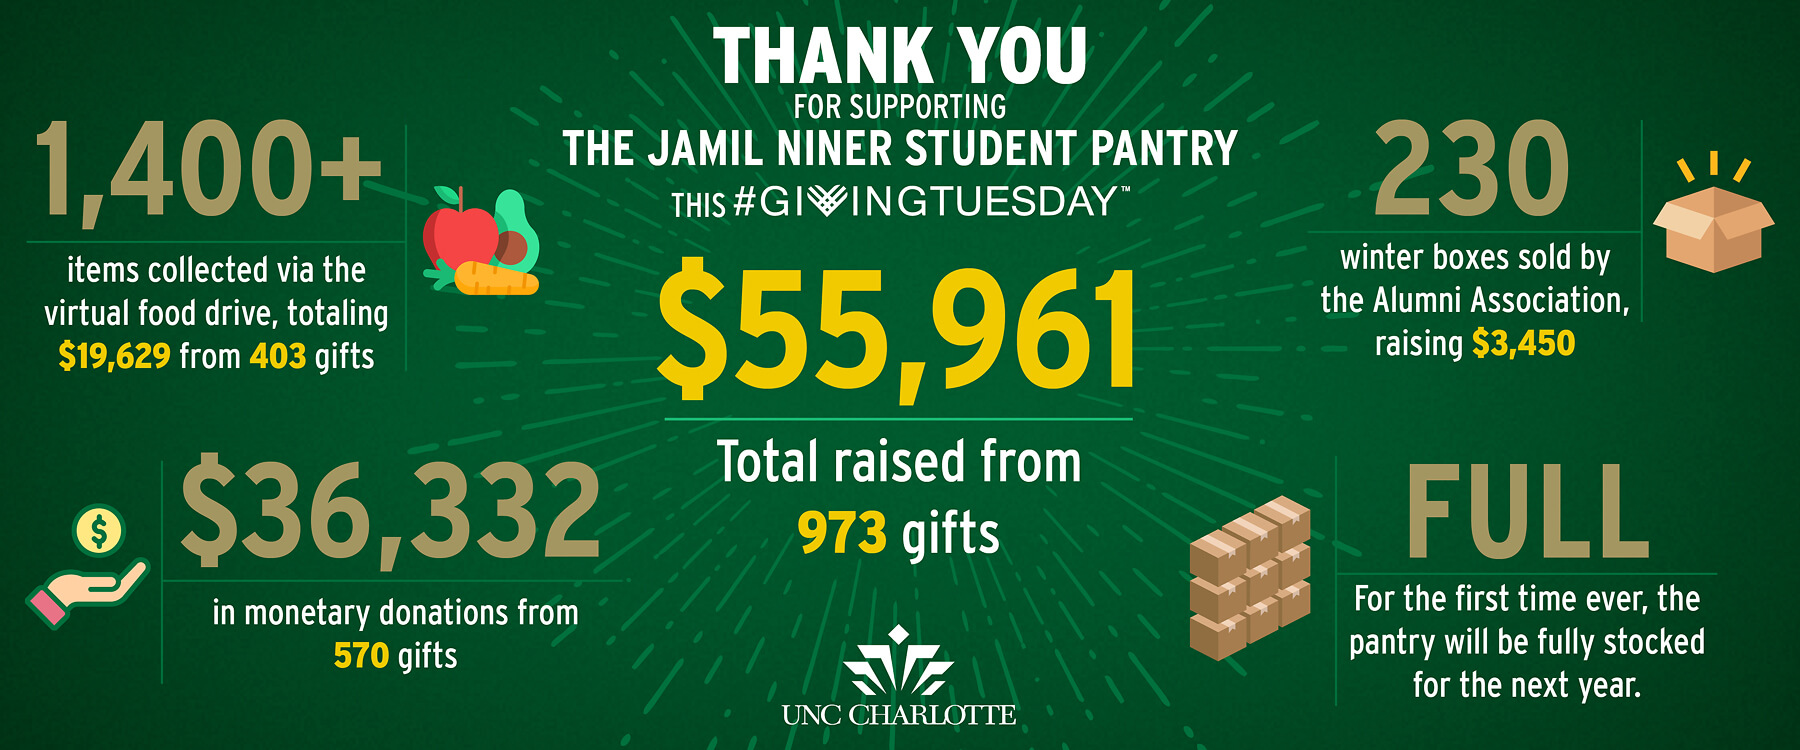 Thank you for supporting the Jamil Niner Student Pantry!